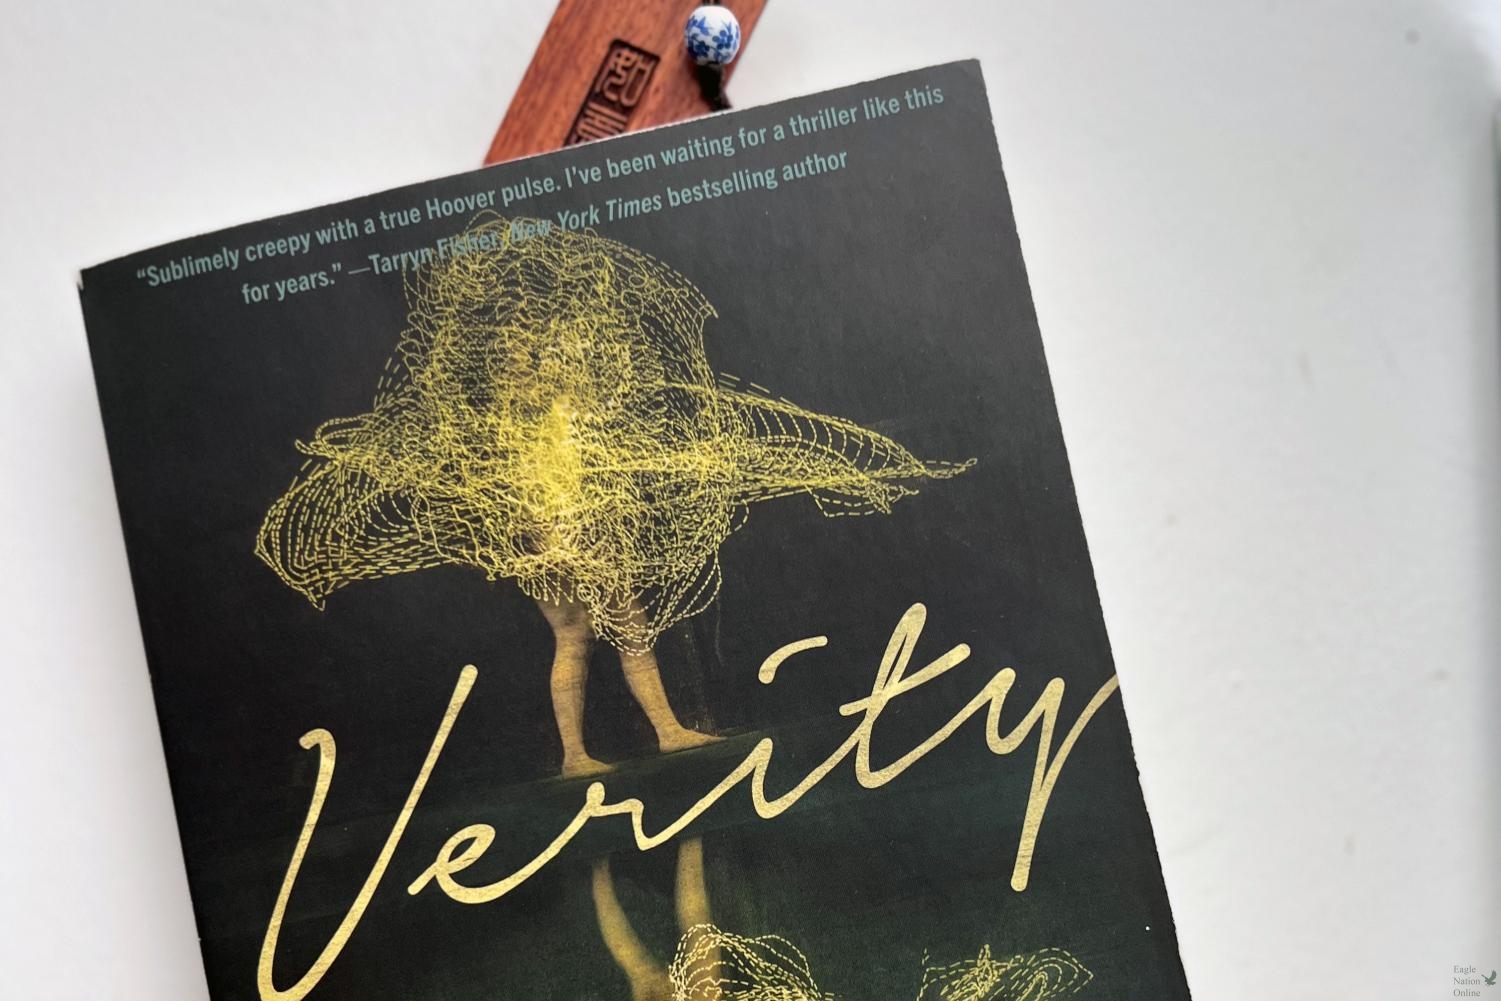 Review: “Verity” by Colleen Hoover gives readers a different